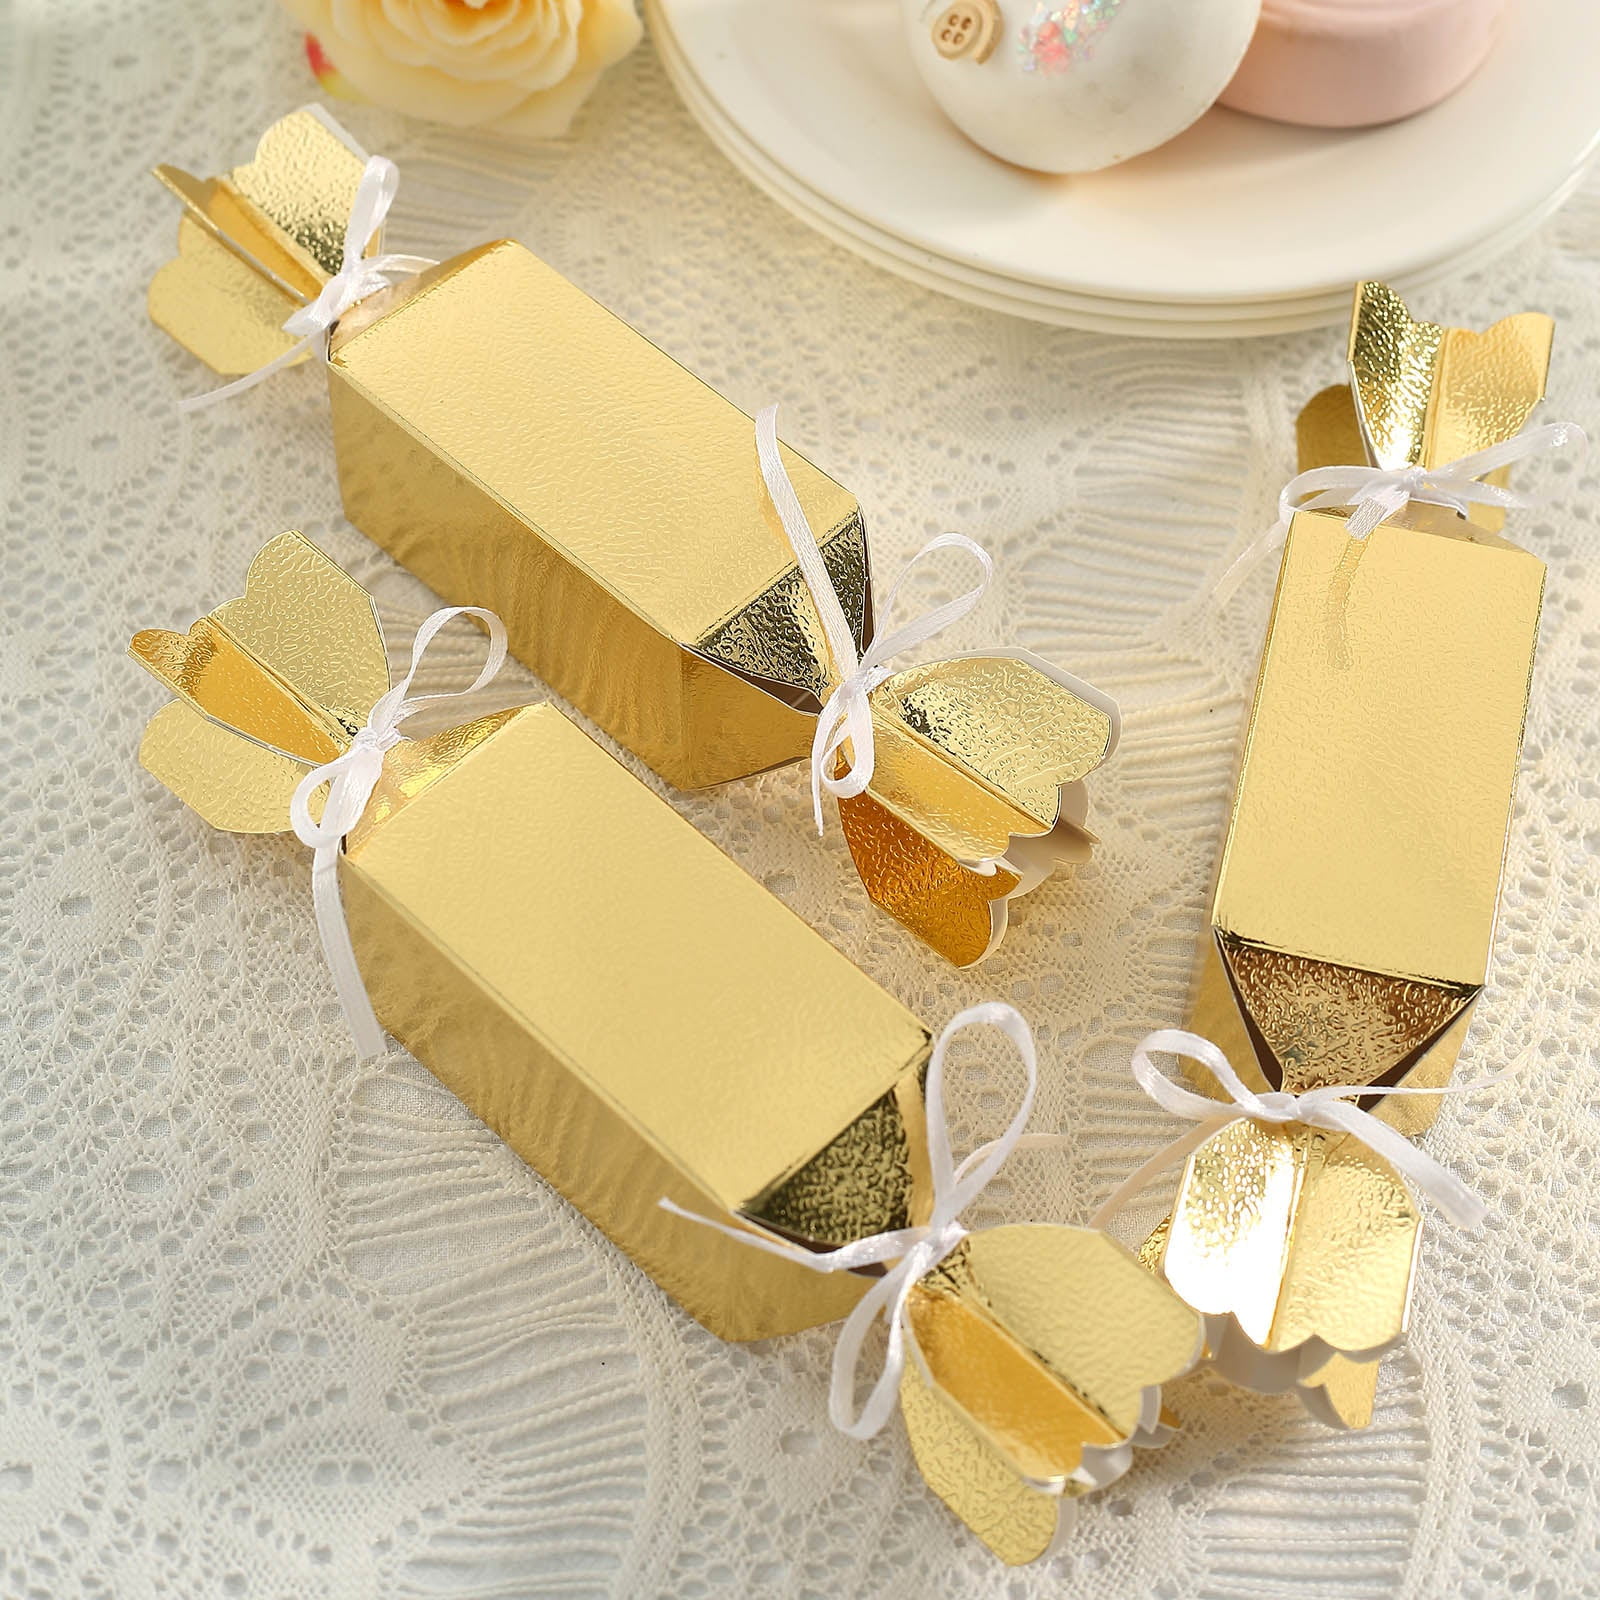 12 Small Cardboard Bows Jewelry Gift Box for Bridesmaid Wedding Party Supplies 